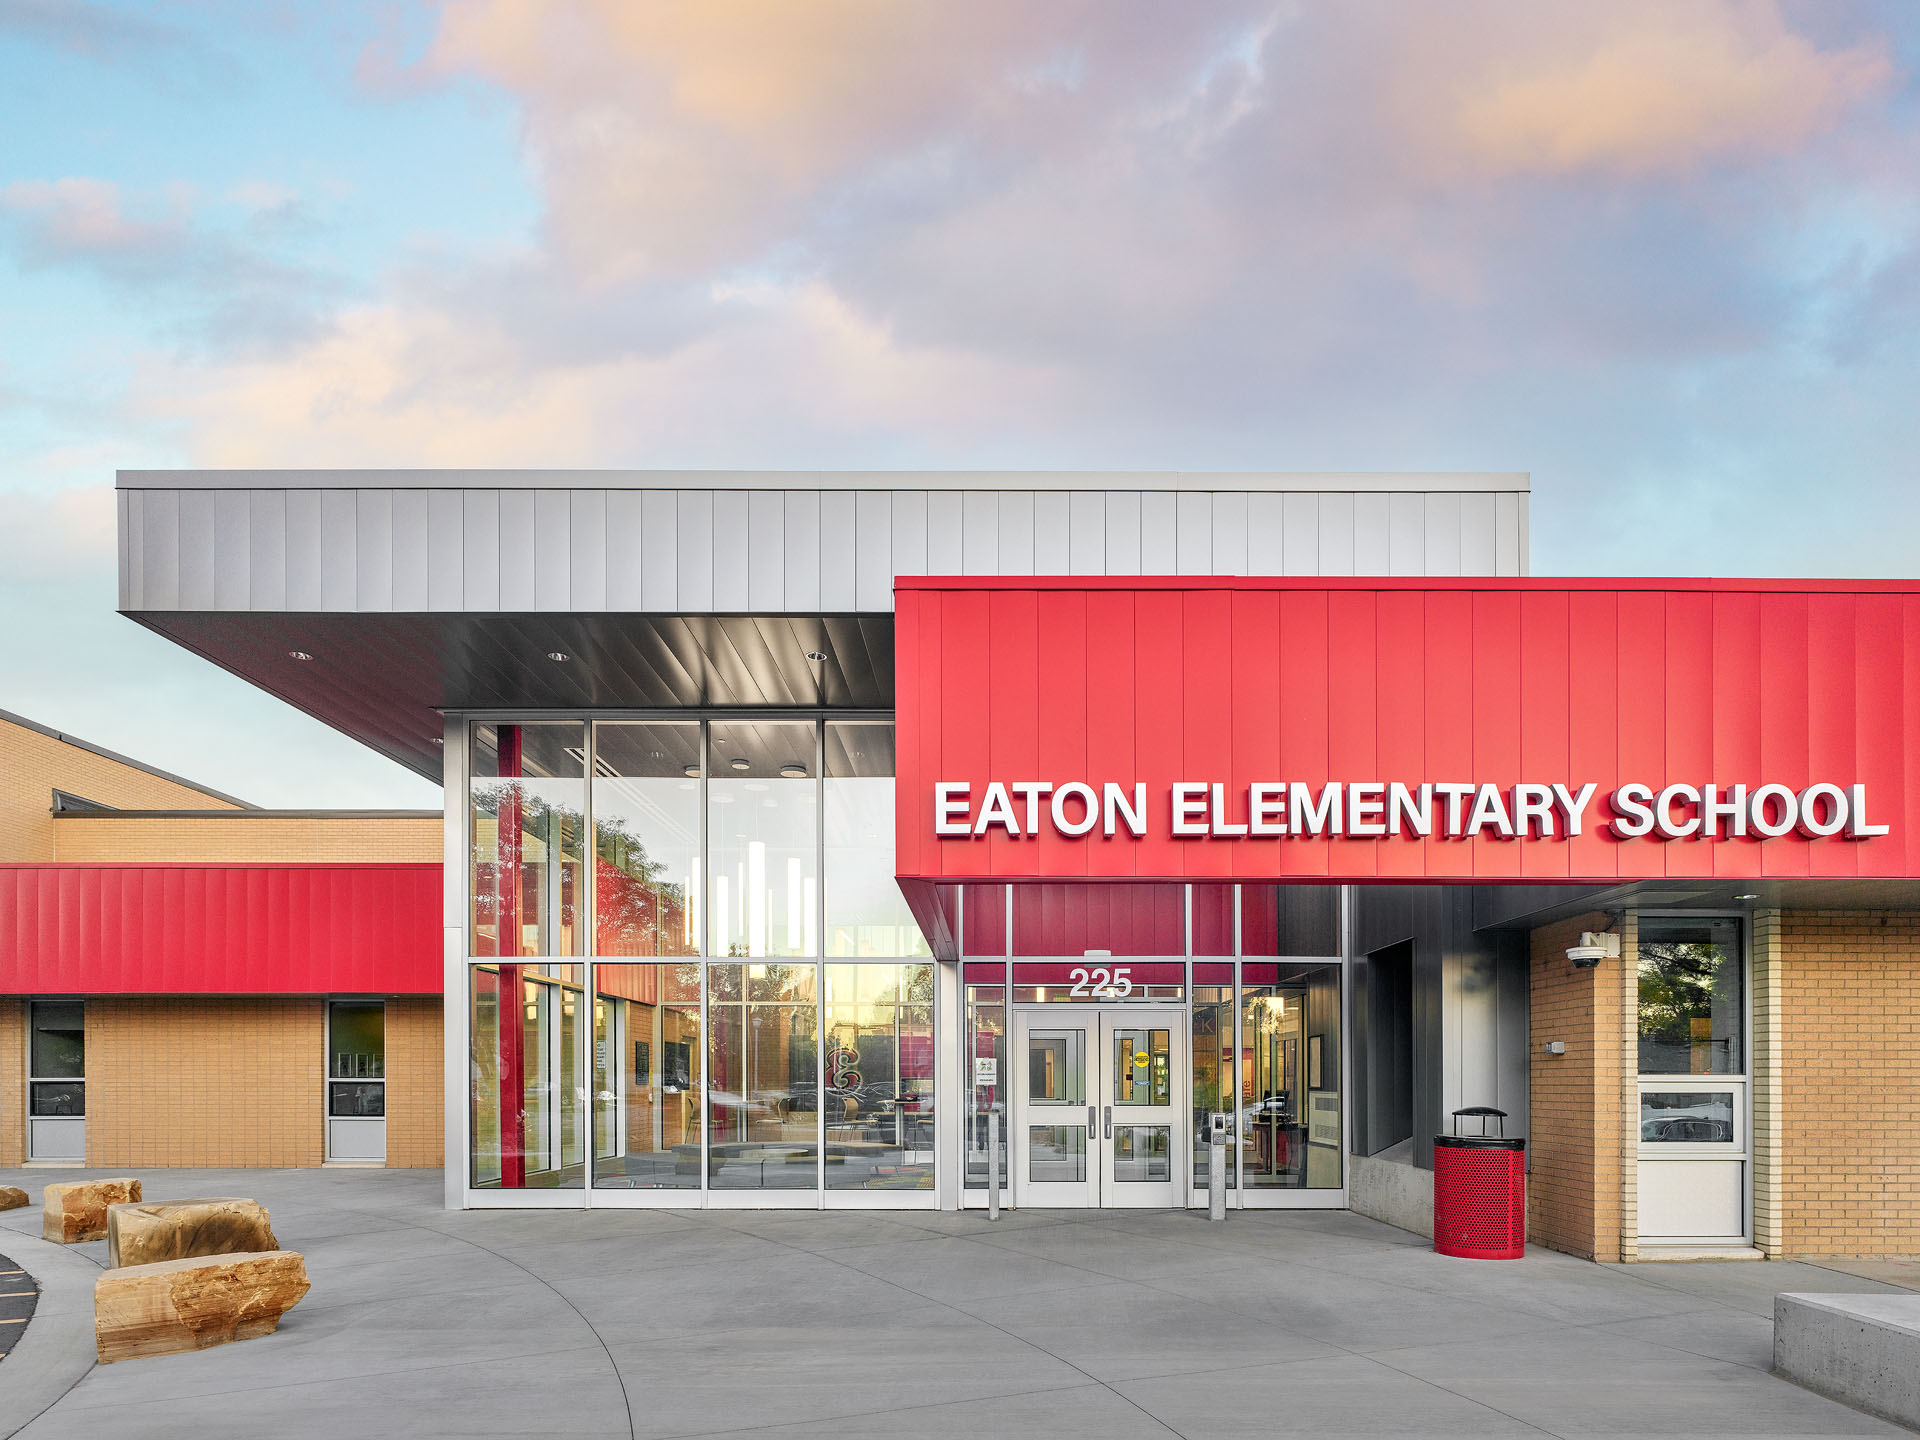 K-12 Architectural Photography of Eaton Elementary School
